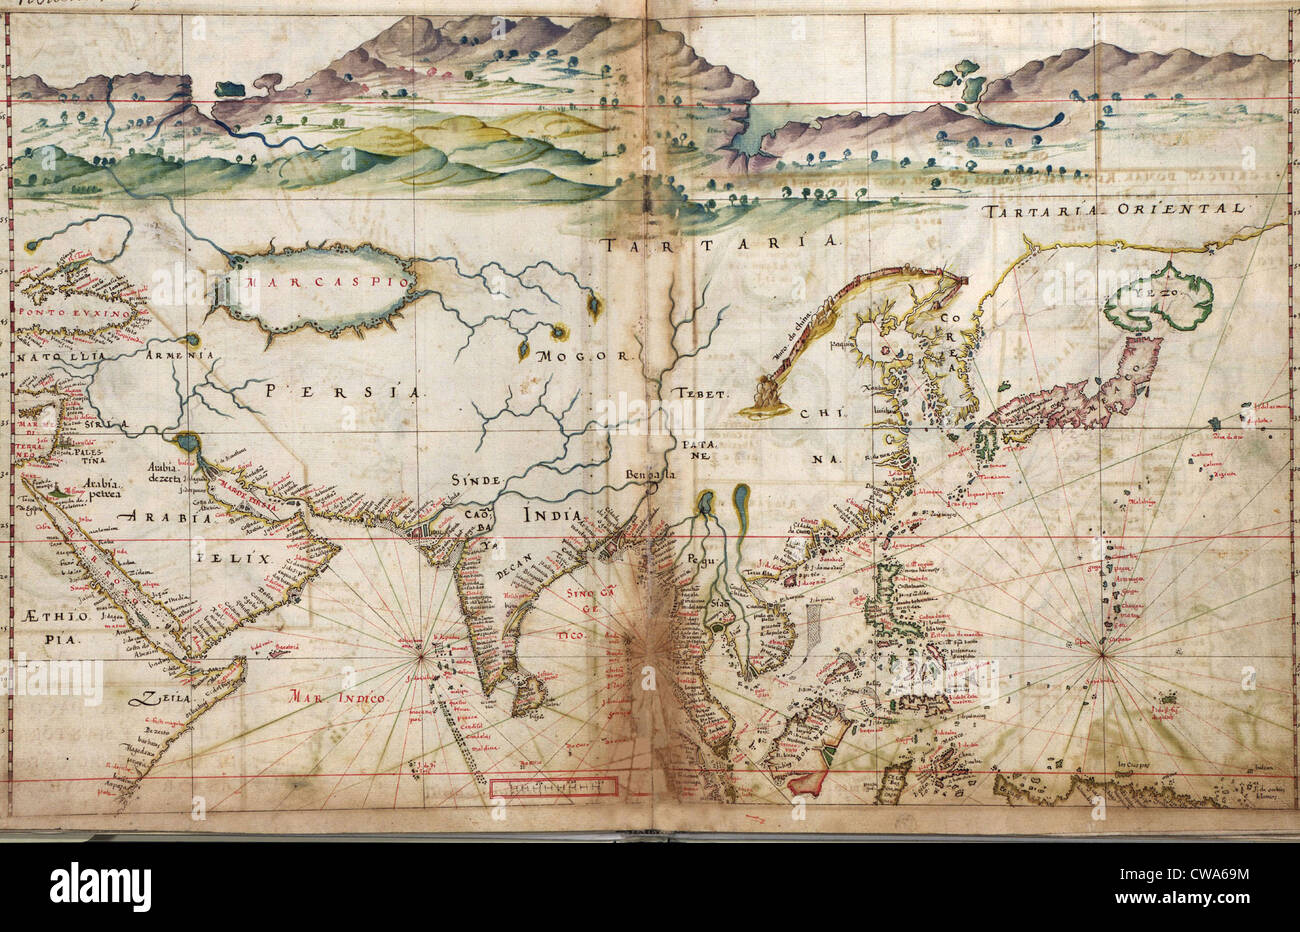 1630 Portuguese maps, showing details of Asian coastal forts and cities, gathered by a century of the Portuguese explorations Stock Photo